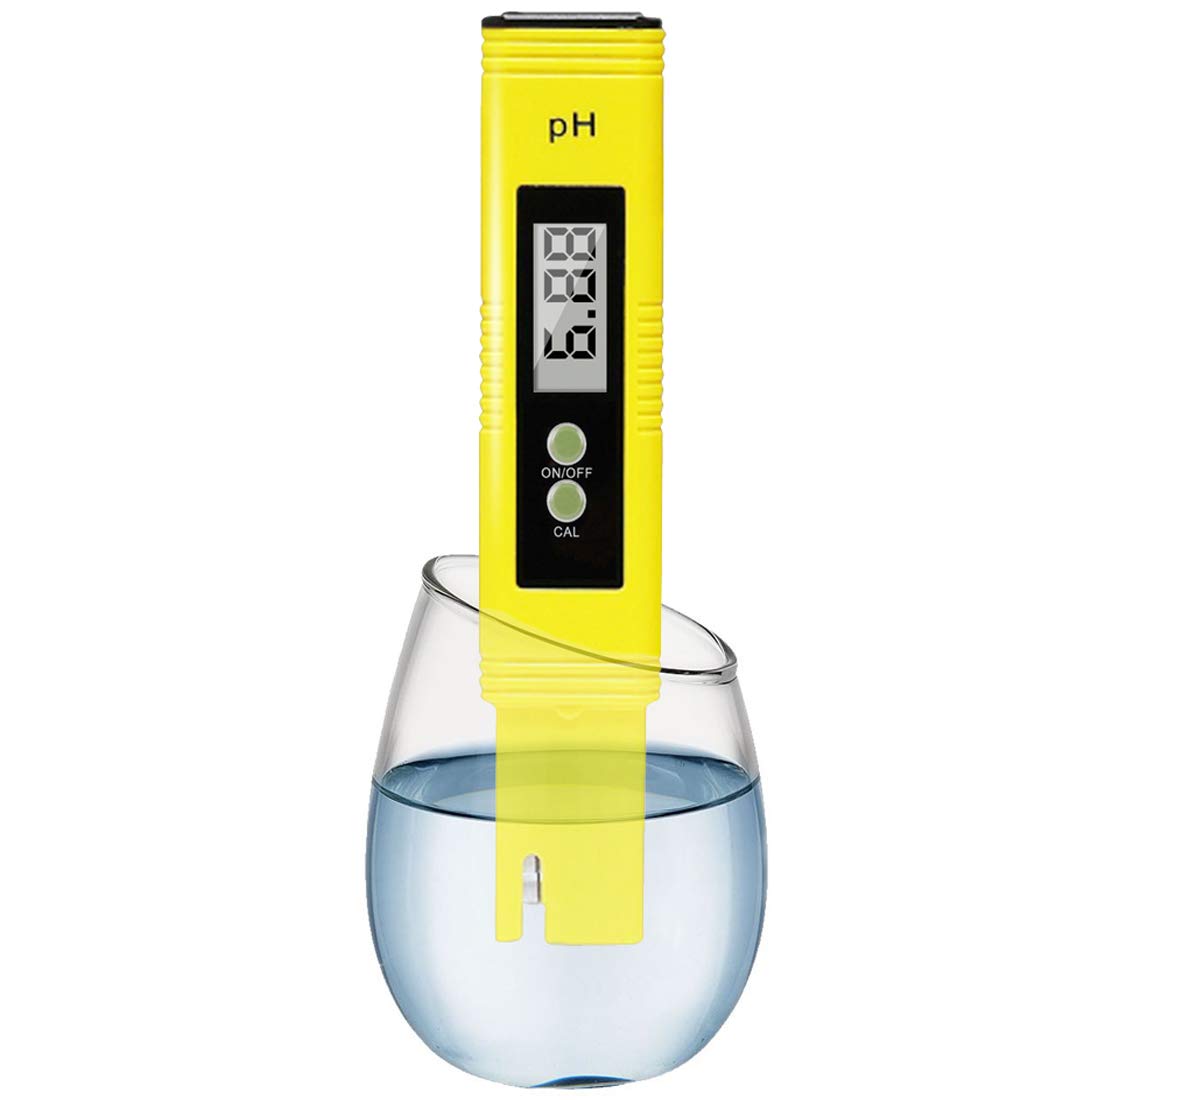 0.01 pH High Accuracy Water Quality Tester with 0-14 pH Measurement Range RUIZHI pH Meter and TDS Meter Combo 3 in 1 TDS EC Temperature Meter with Hold Function 